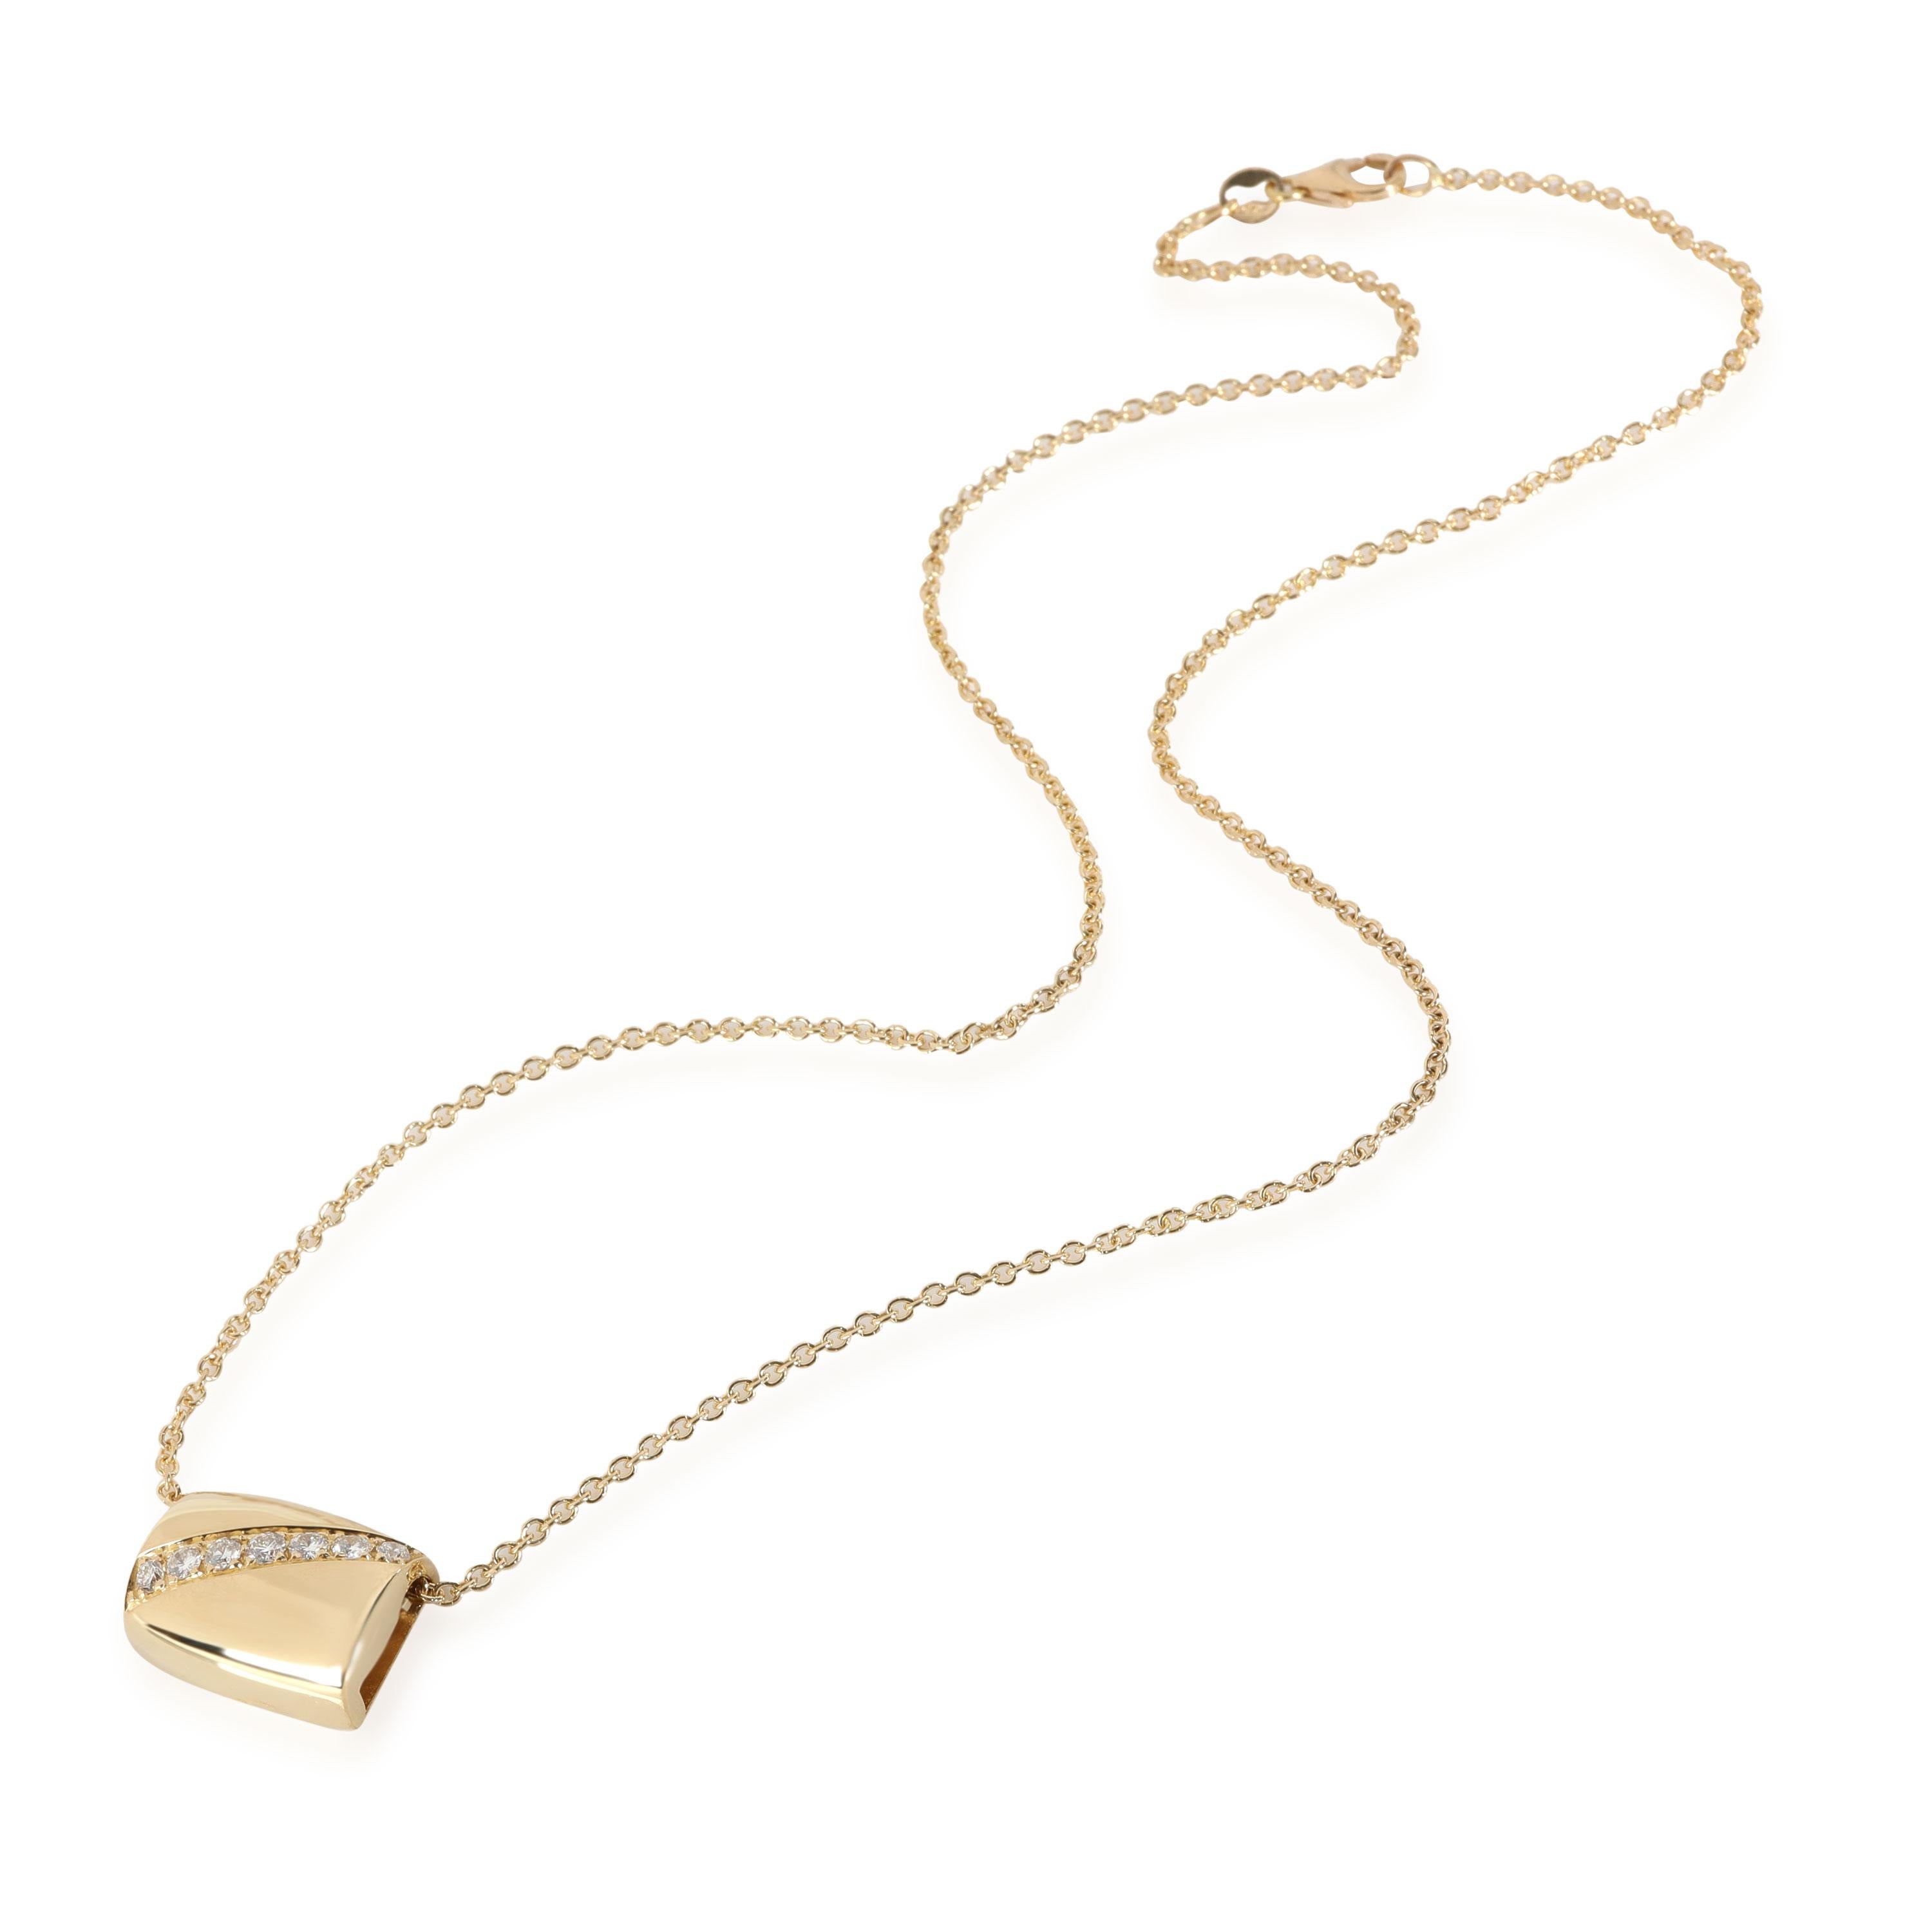 Piaget Vintage Diamond Pendant in 18k Yellow Gold 0.35 CTW

PRIMARY DETAILS
SKU: 116483
Listing Title: Piaget Vintage Diamond Pendant in 18k Yellow Gold 0.35 CTW
Condition Description: Retails for 3500 USD. In excellent condition and recently